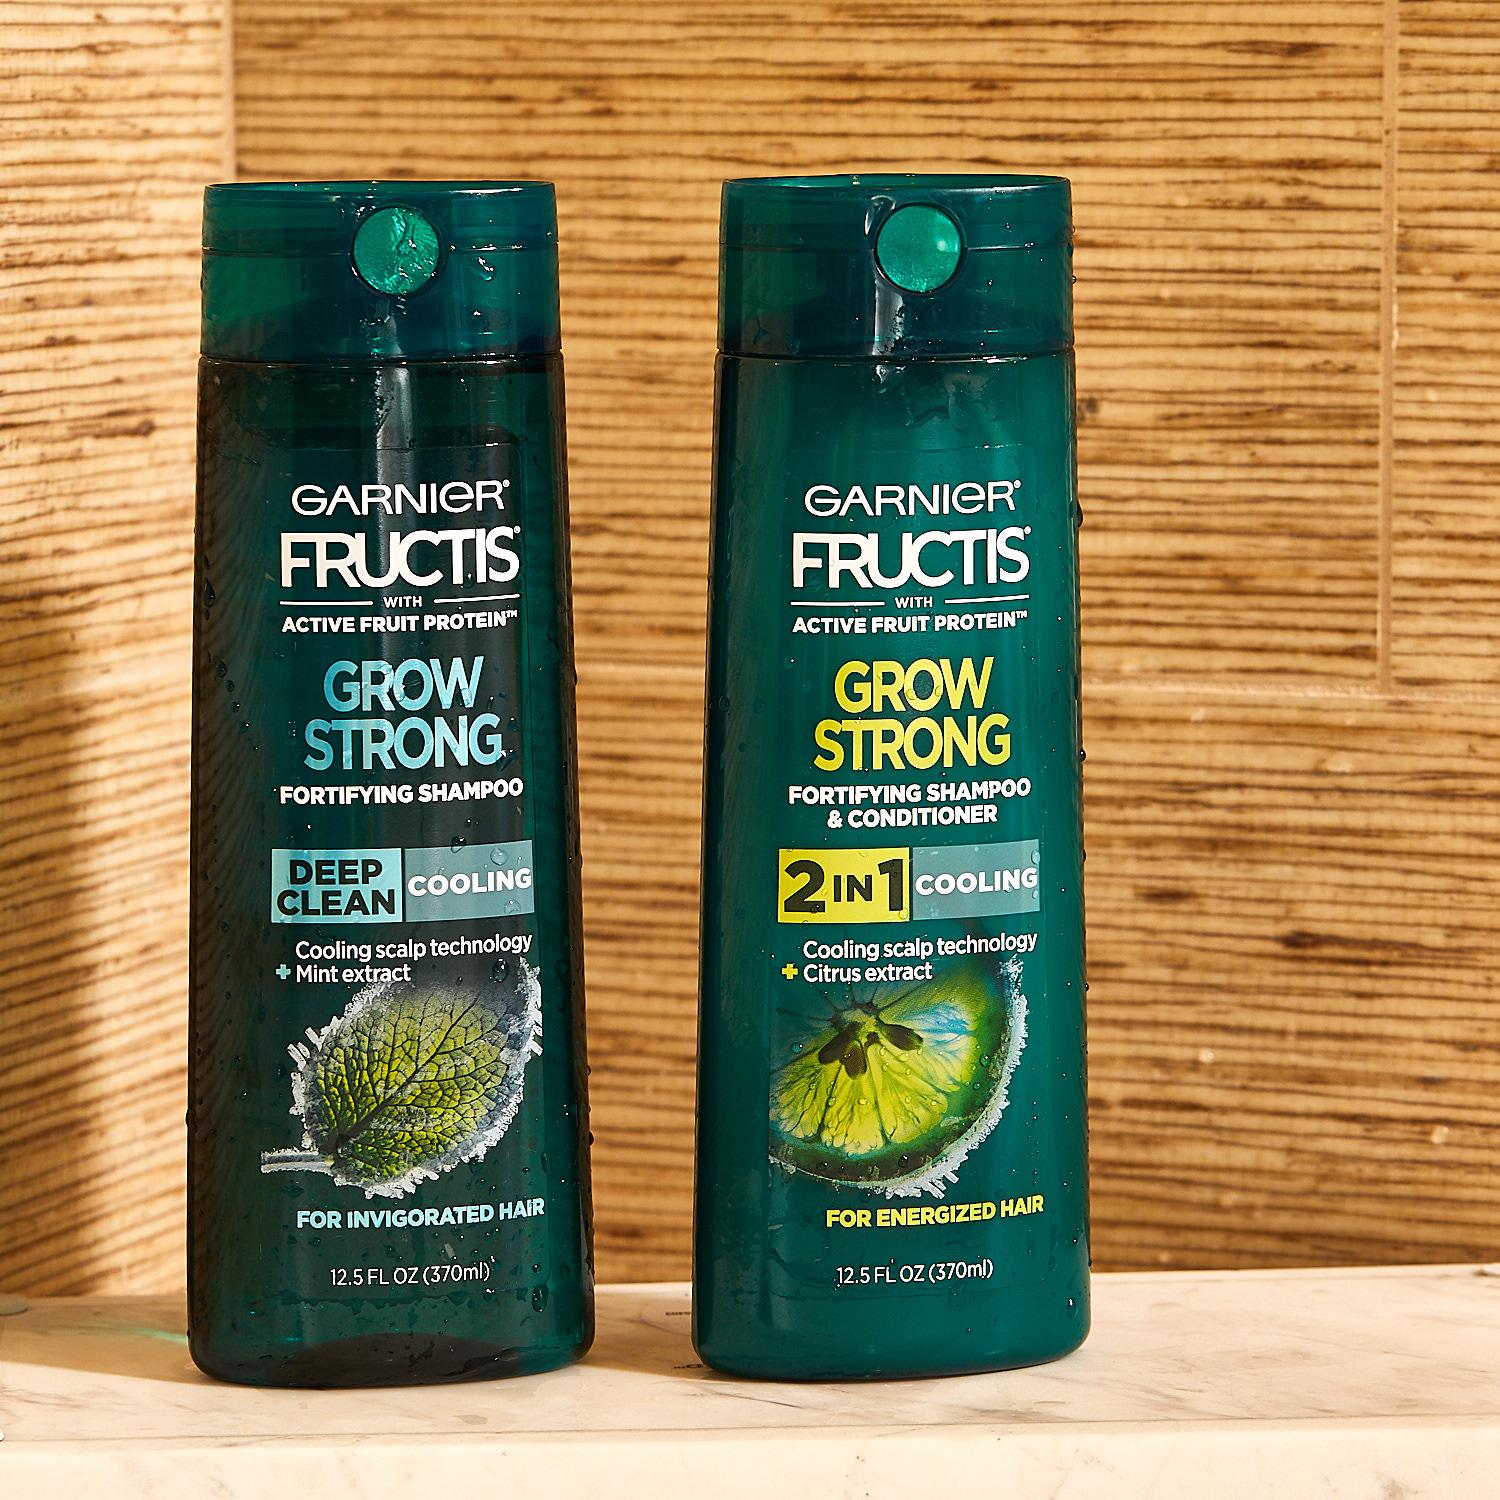 Psychologisch Krijger wervelkolom Garnier USA on Twitter: "Gals, have you told your guys about our new #Fructis  shampoo for Men yet? Choose from: 1️⃣ Grow Strong Deep Clean Cooling Shampoo  2️⃣ Grow Strong 2-in-1 Shampoo